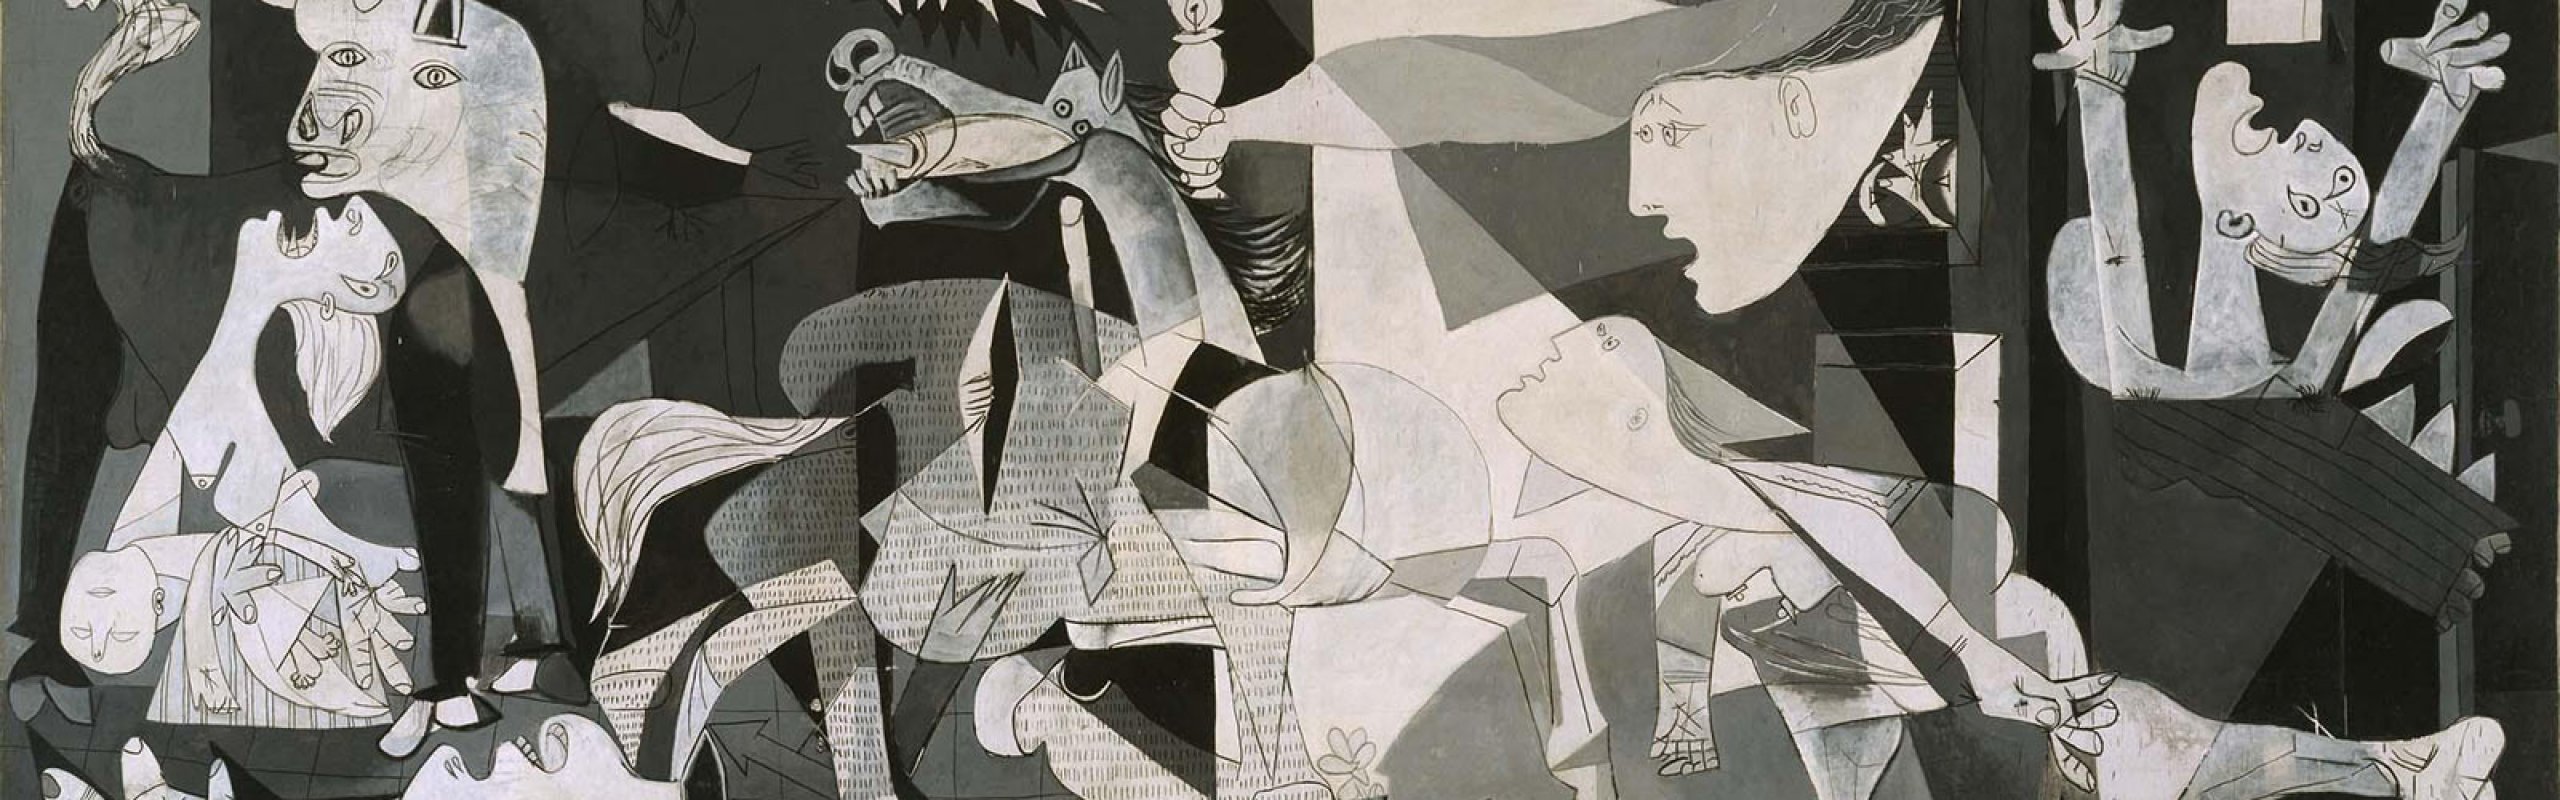 Picasso and the meaning of Guernica